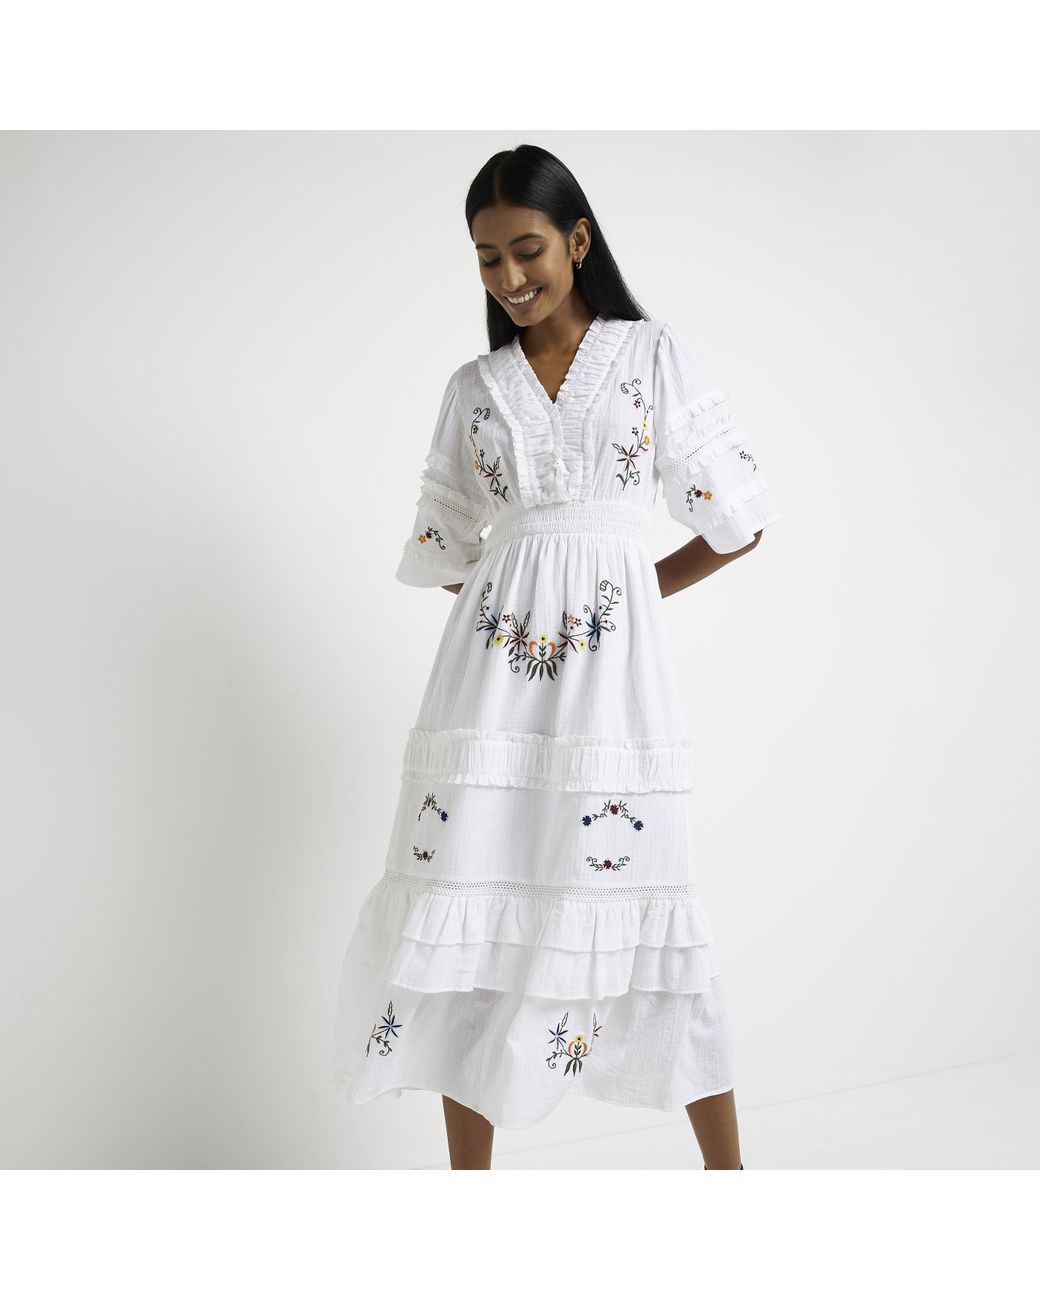 River Island Embroidered Smock Midi Dress in White | Lyst UK